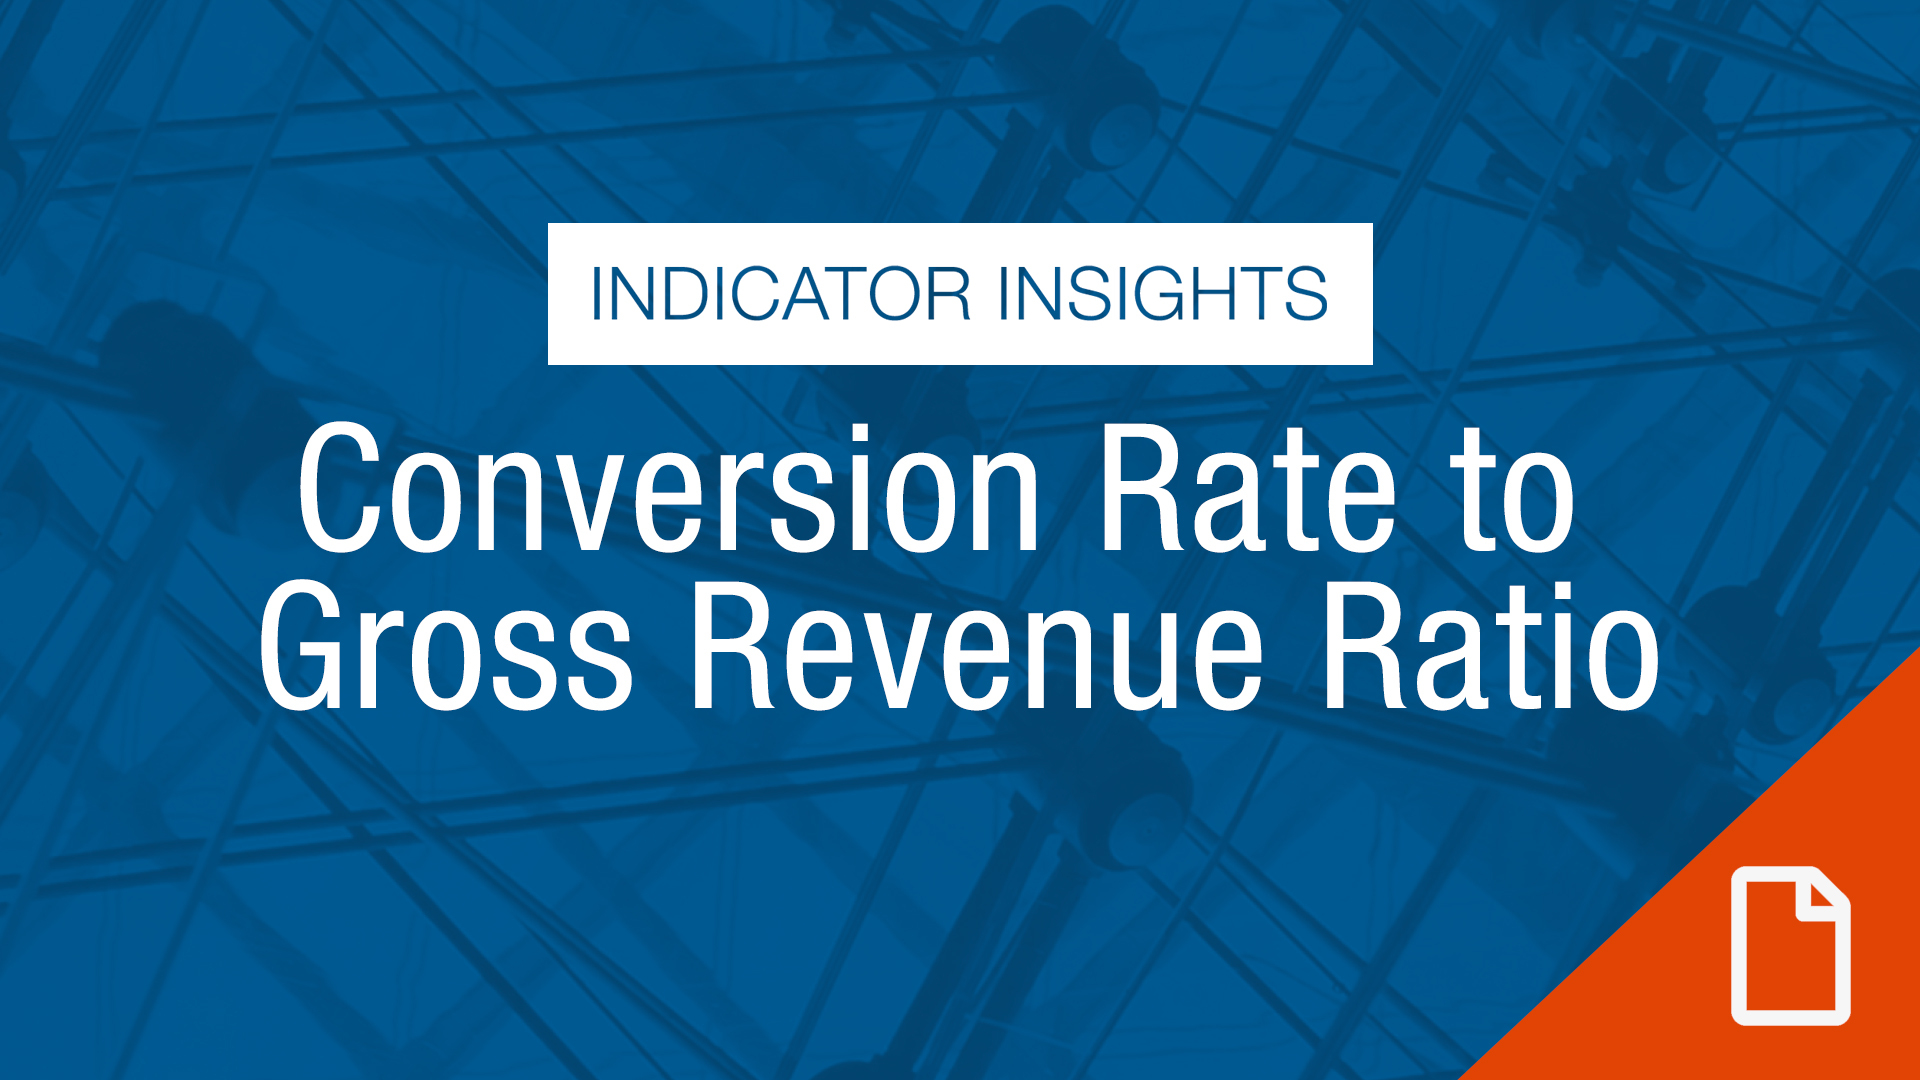 Thumbnail Indicator Insights Conversion Ratio To Gross Rev